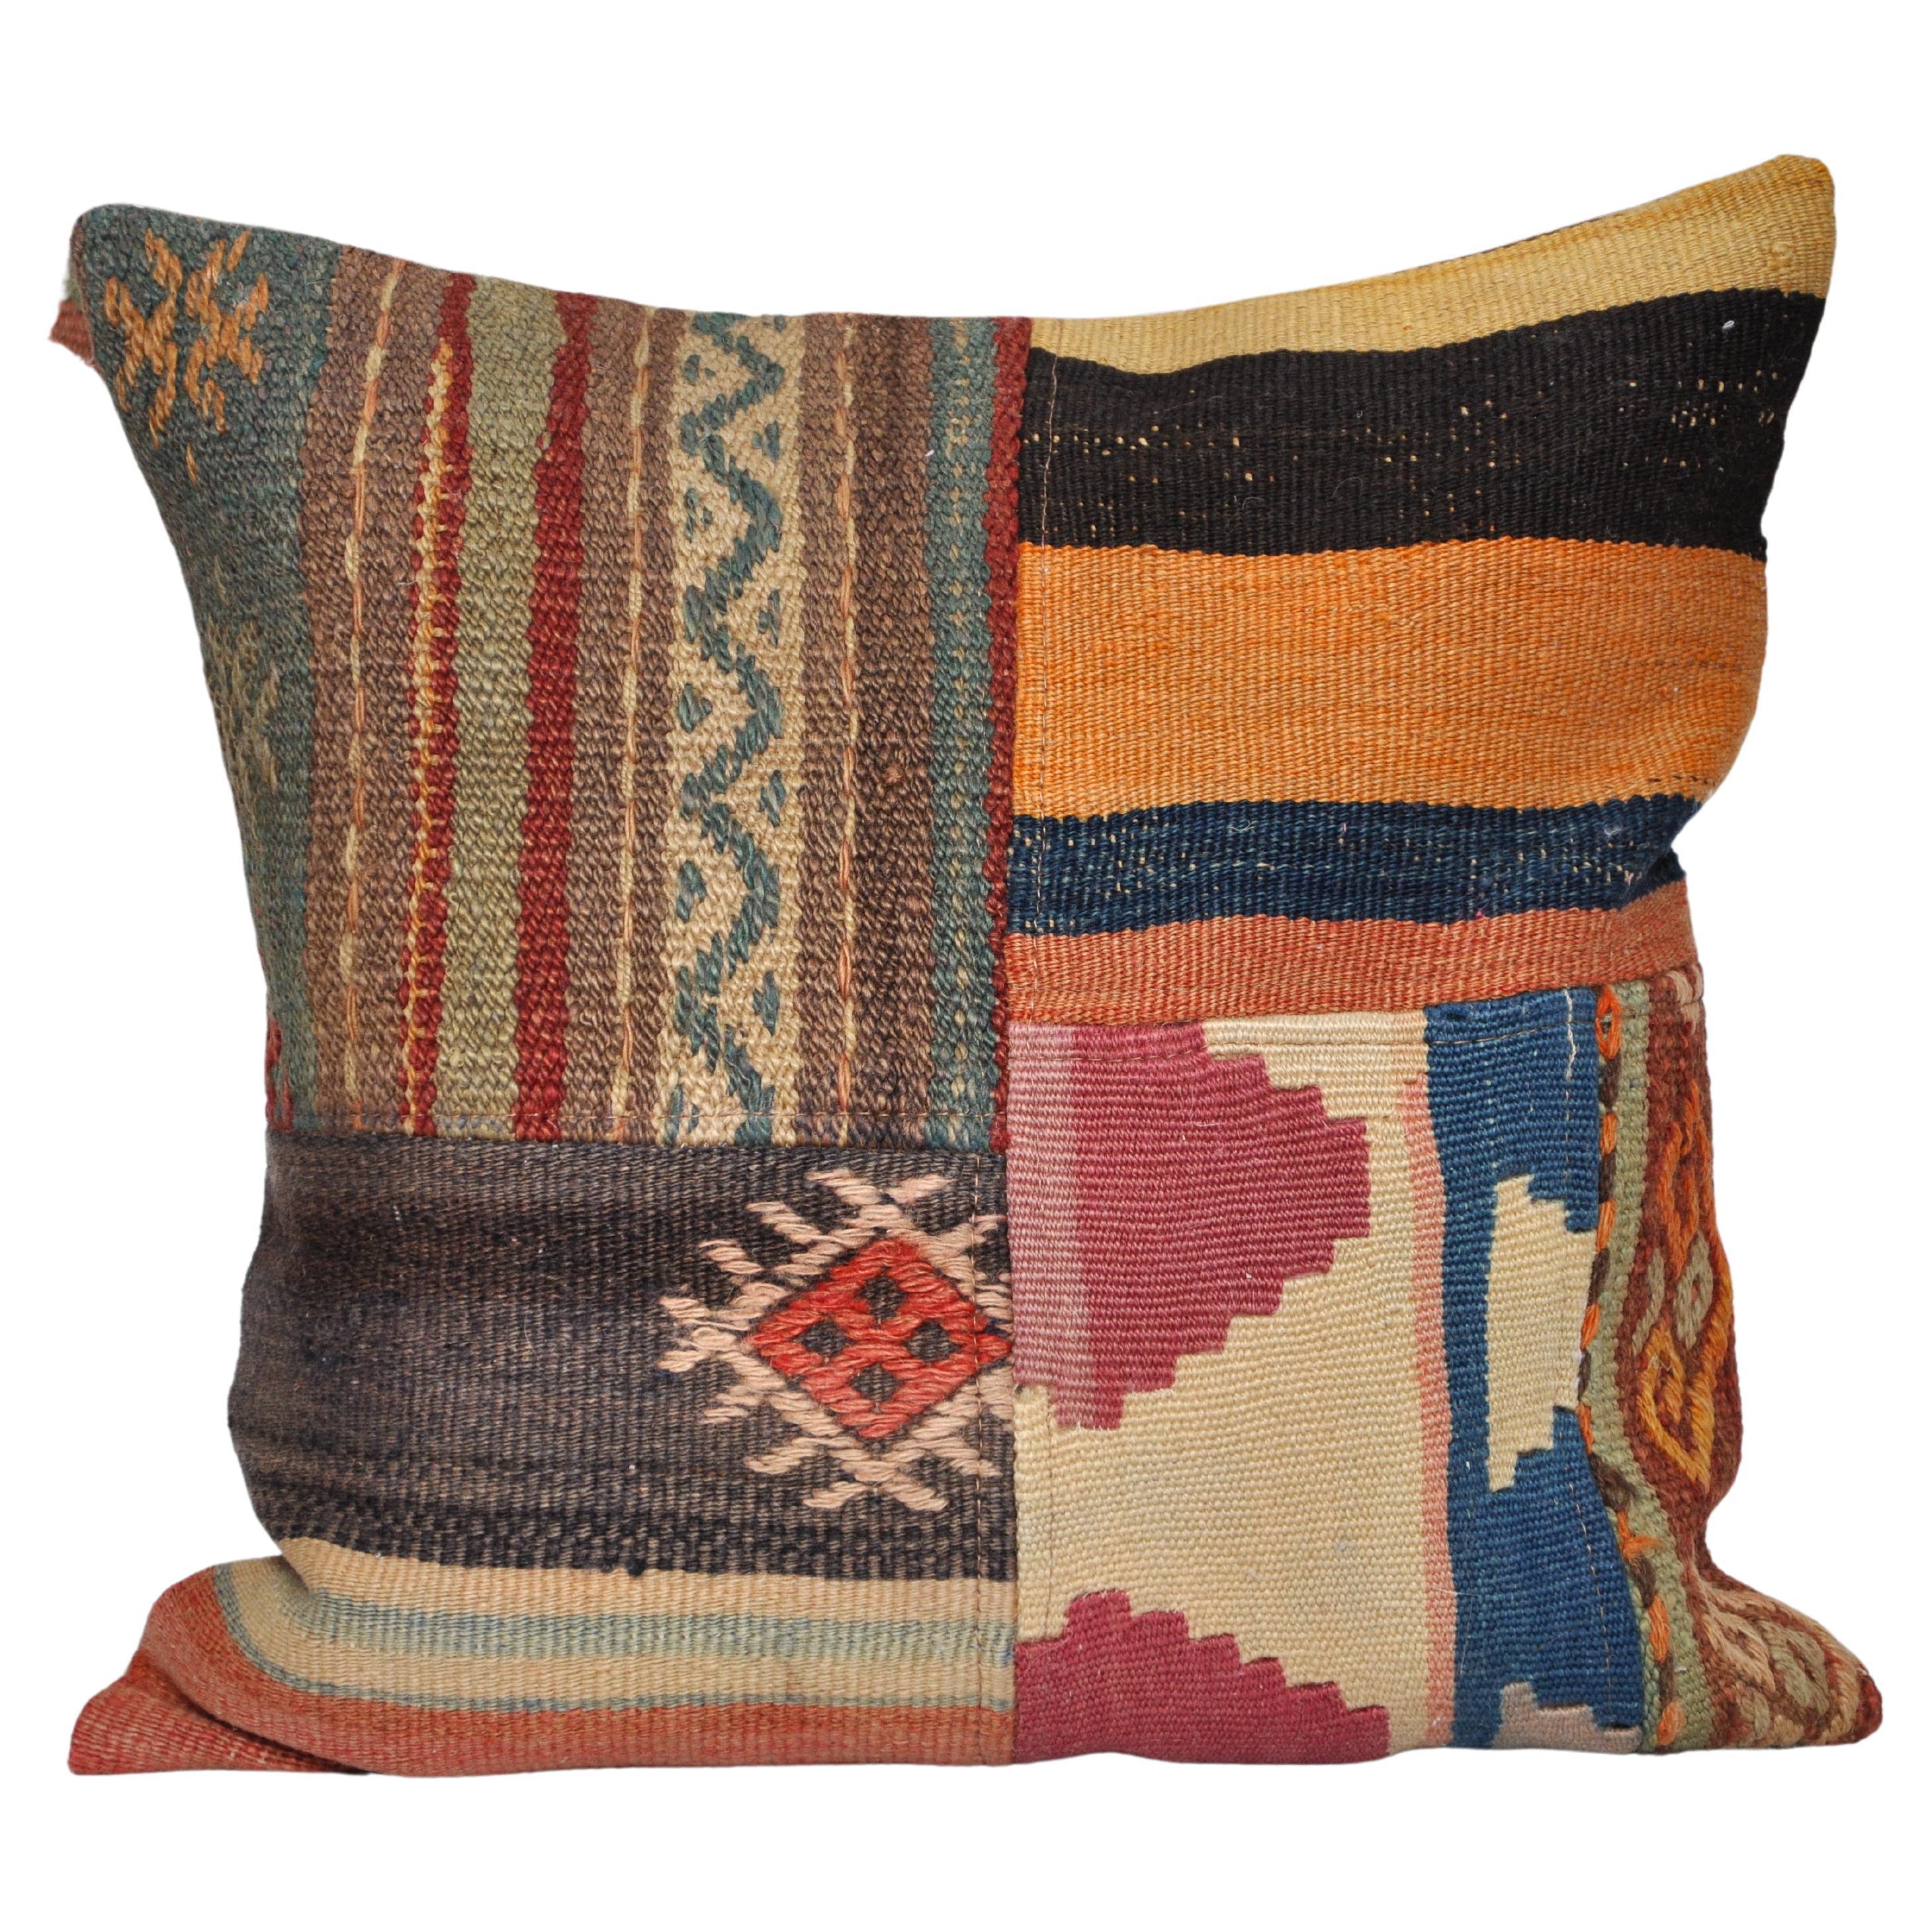 Bohemian Vintage Kilim Rug Patchwork Pillow with Irish Linen Cushion Red Yellow Black For Sale